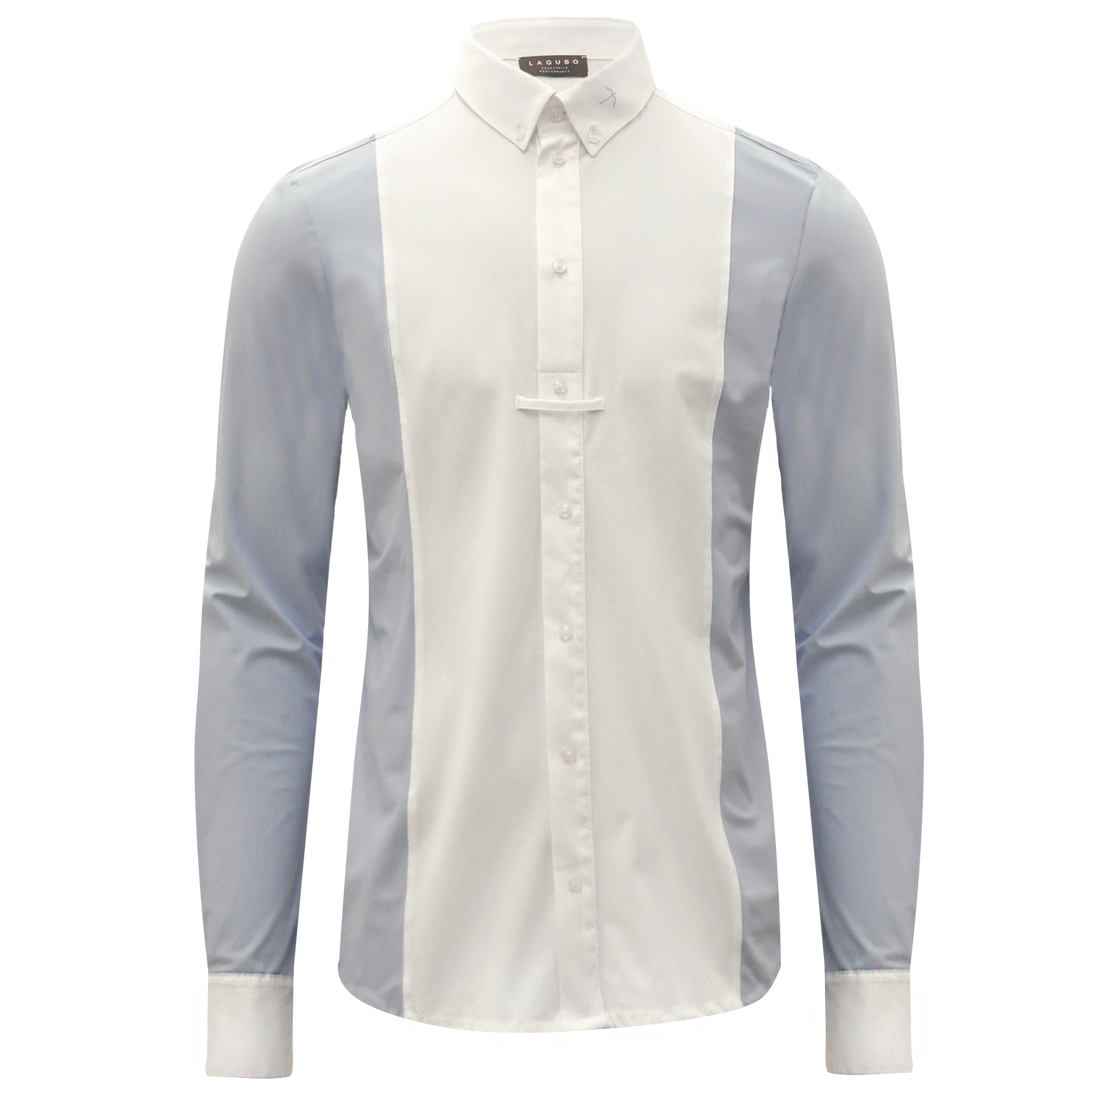 The stunning Laguso Max men’s Show shirt is made from a soft stretch jersey. The shirt has a white cuff and button placket front with a 1/2 opening so no pulling. The slimline blue panel at the sides and sleeves give this shirt a modern sporty look.  The Laguso logo on the button down collar. Tie holder at the front.   Machine washable at 30’c. Do not tumble dry.